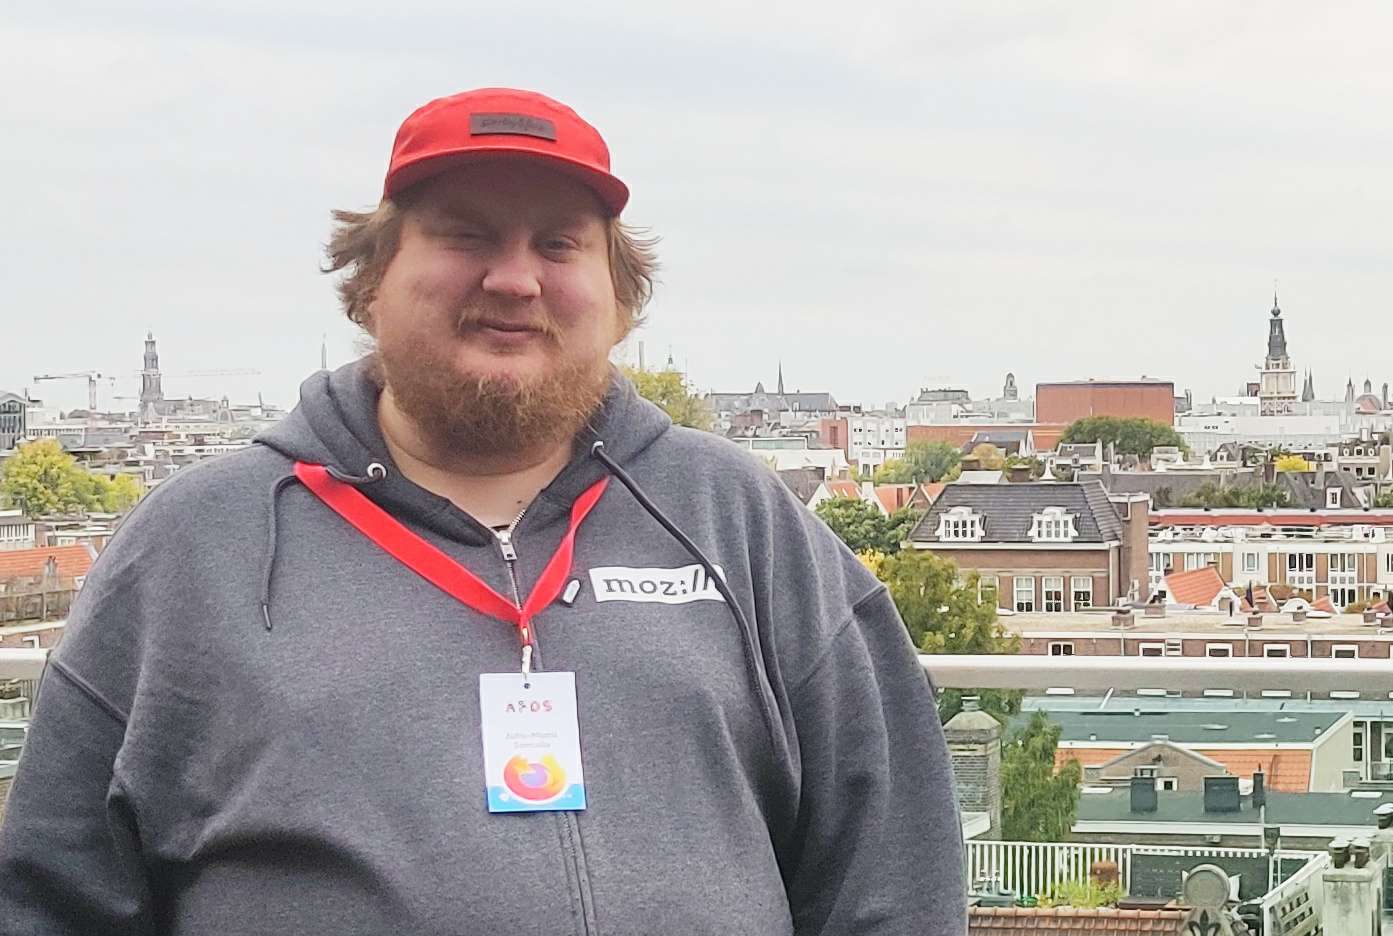  Me standing outside, wearing a red cap and grey hoodie with Mozilla logo. I have  conference badge with a Firefox sticker hanging from my neck. Behind me, there are the rooftops of Amsterdam.